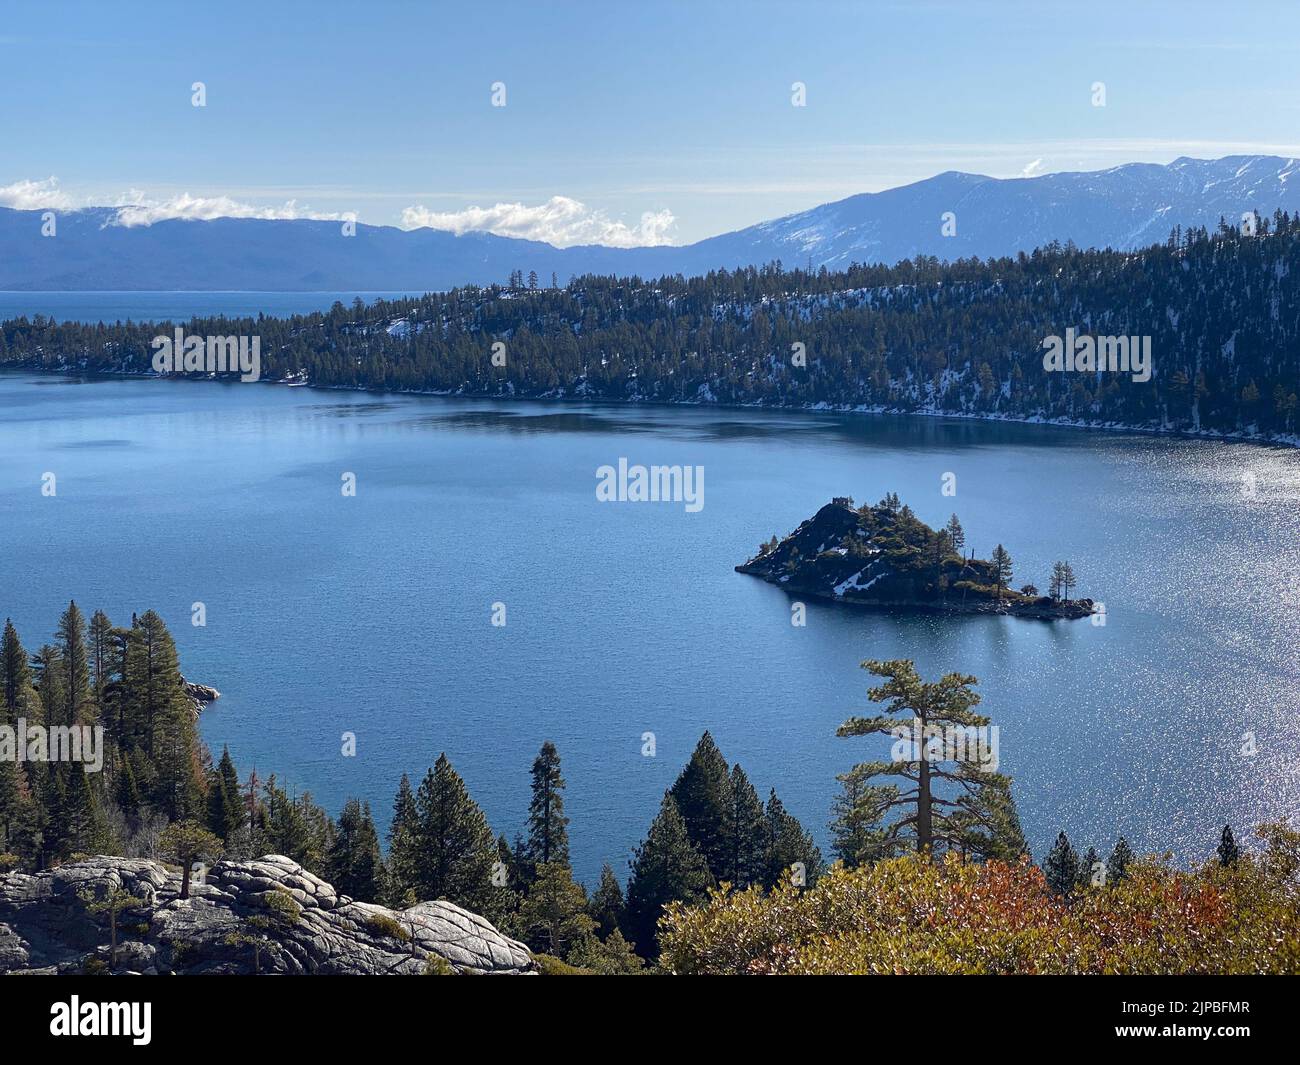 Photo of Fannette Island in Lake Tahoe within Emerald Bay State Park in California, United States, USA. Stock Photo